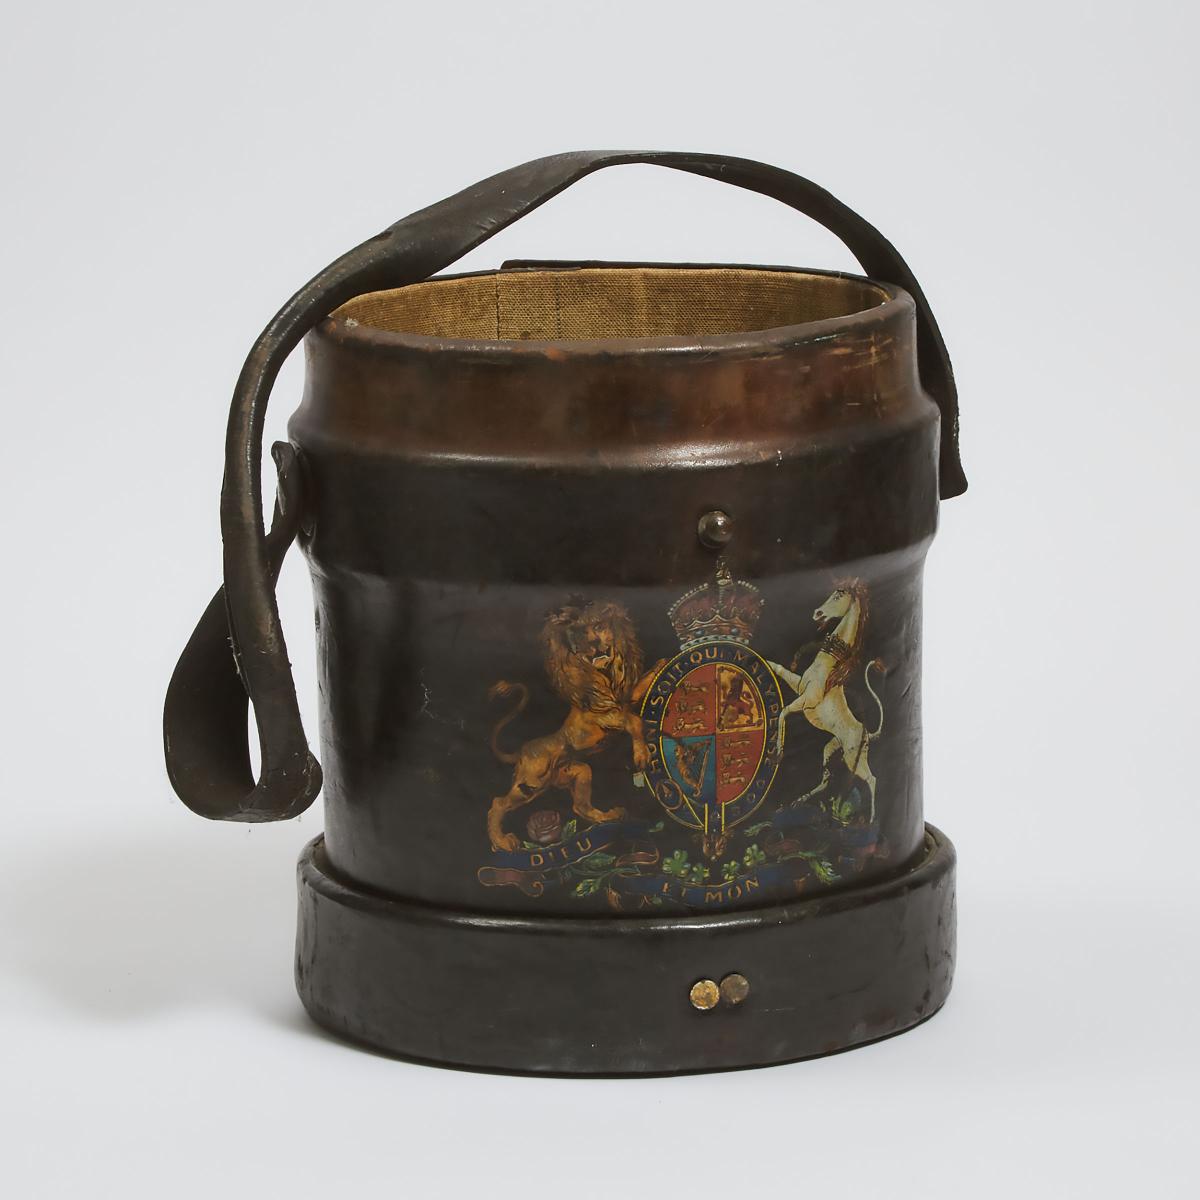 WWII British Royal Artillery Leather Shot Bucket, March, 1940, height 13.4 in — 34 cm